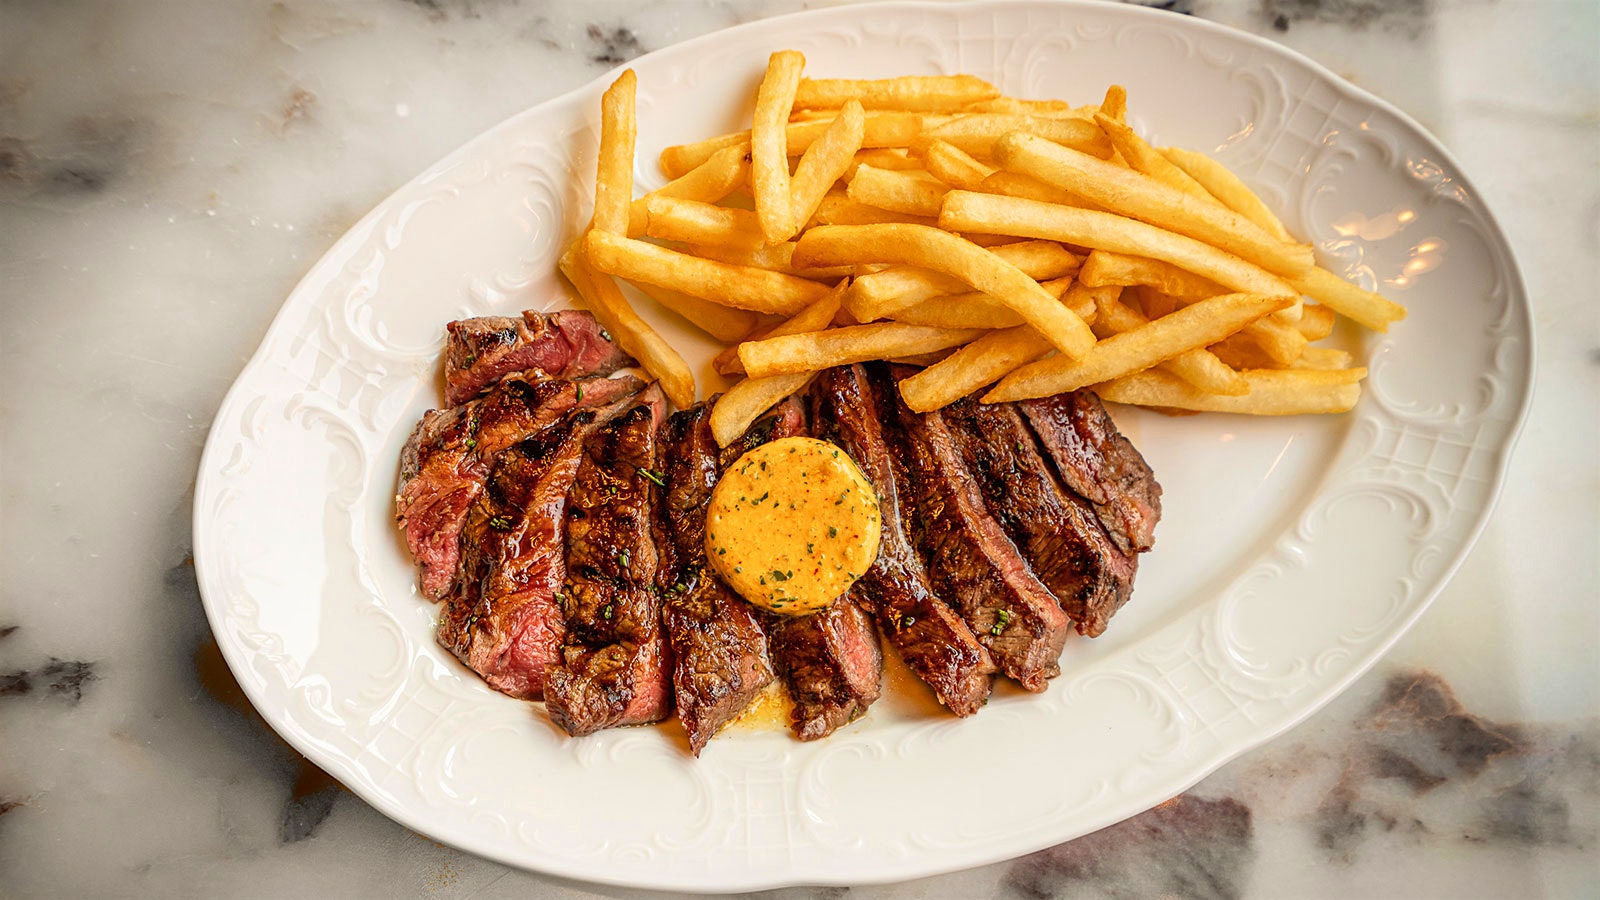  A plate of steak frites